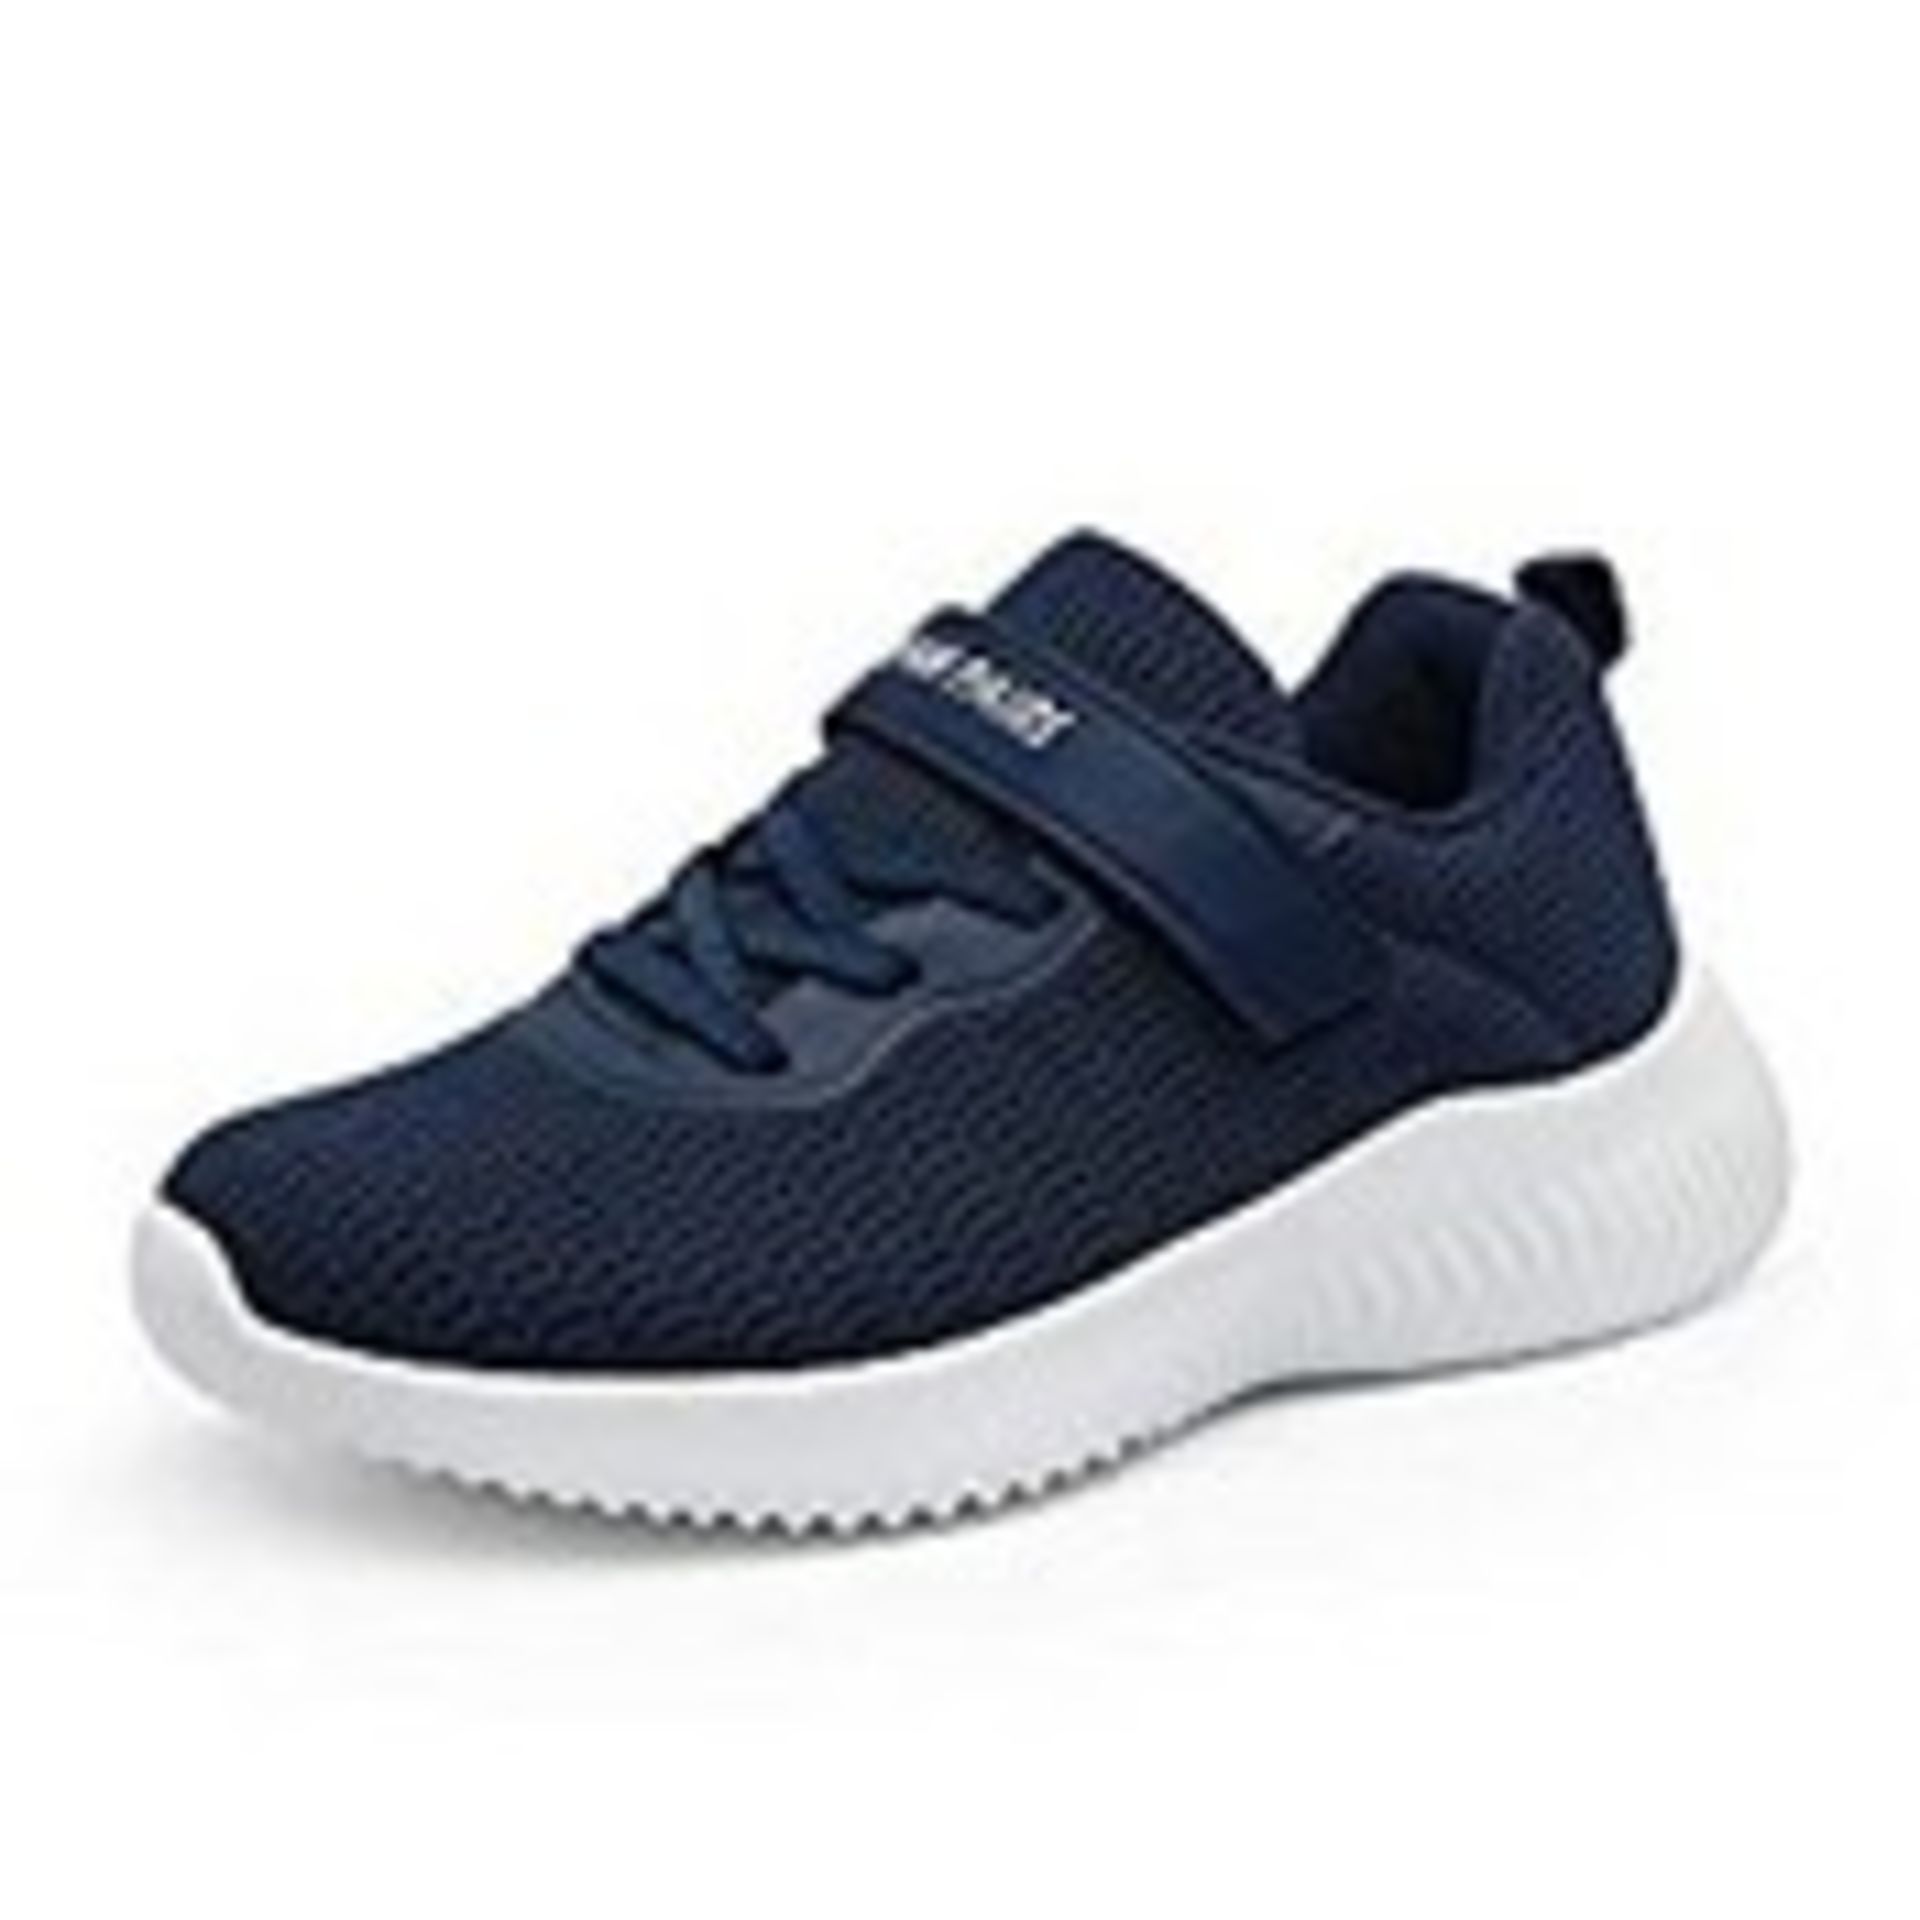 RRP £17.99 DREAM PAIRS Boys Girls Breathable Tennis Running Shoes